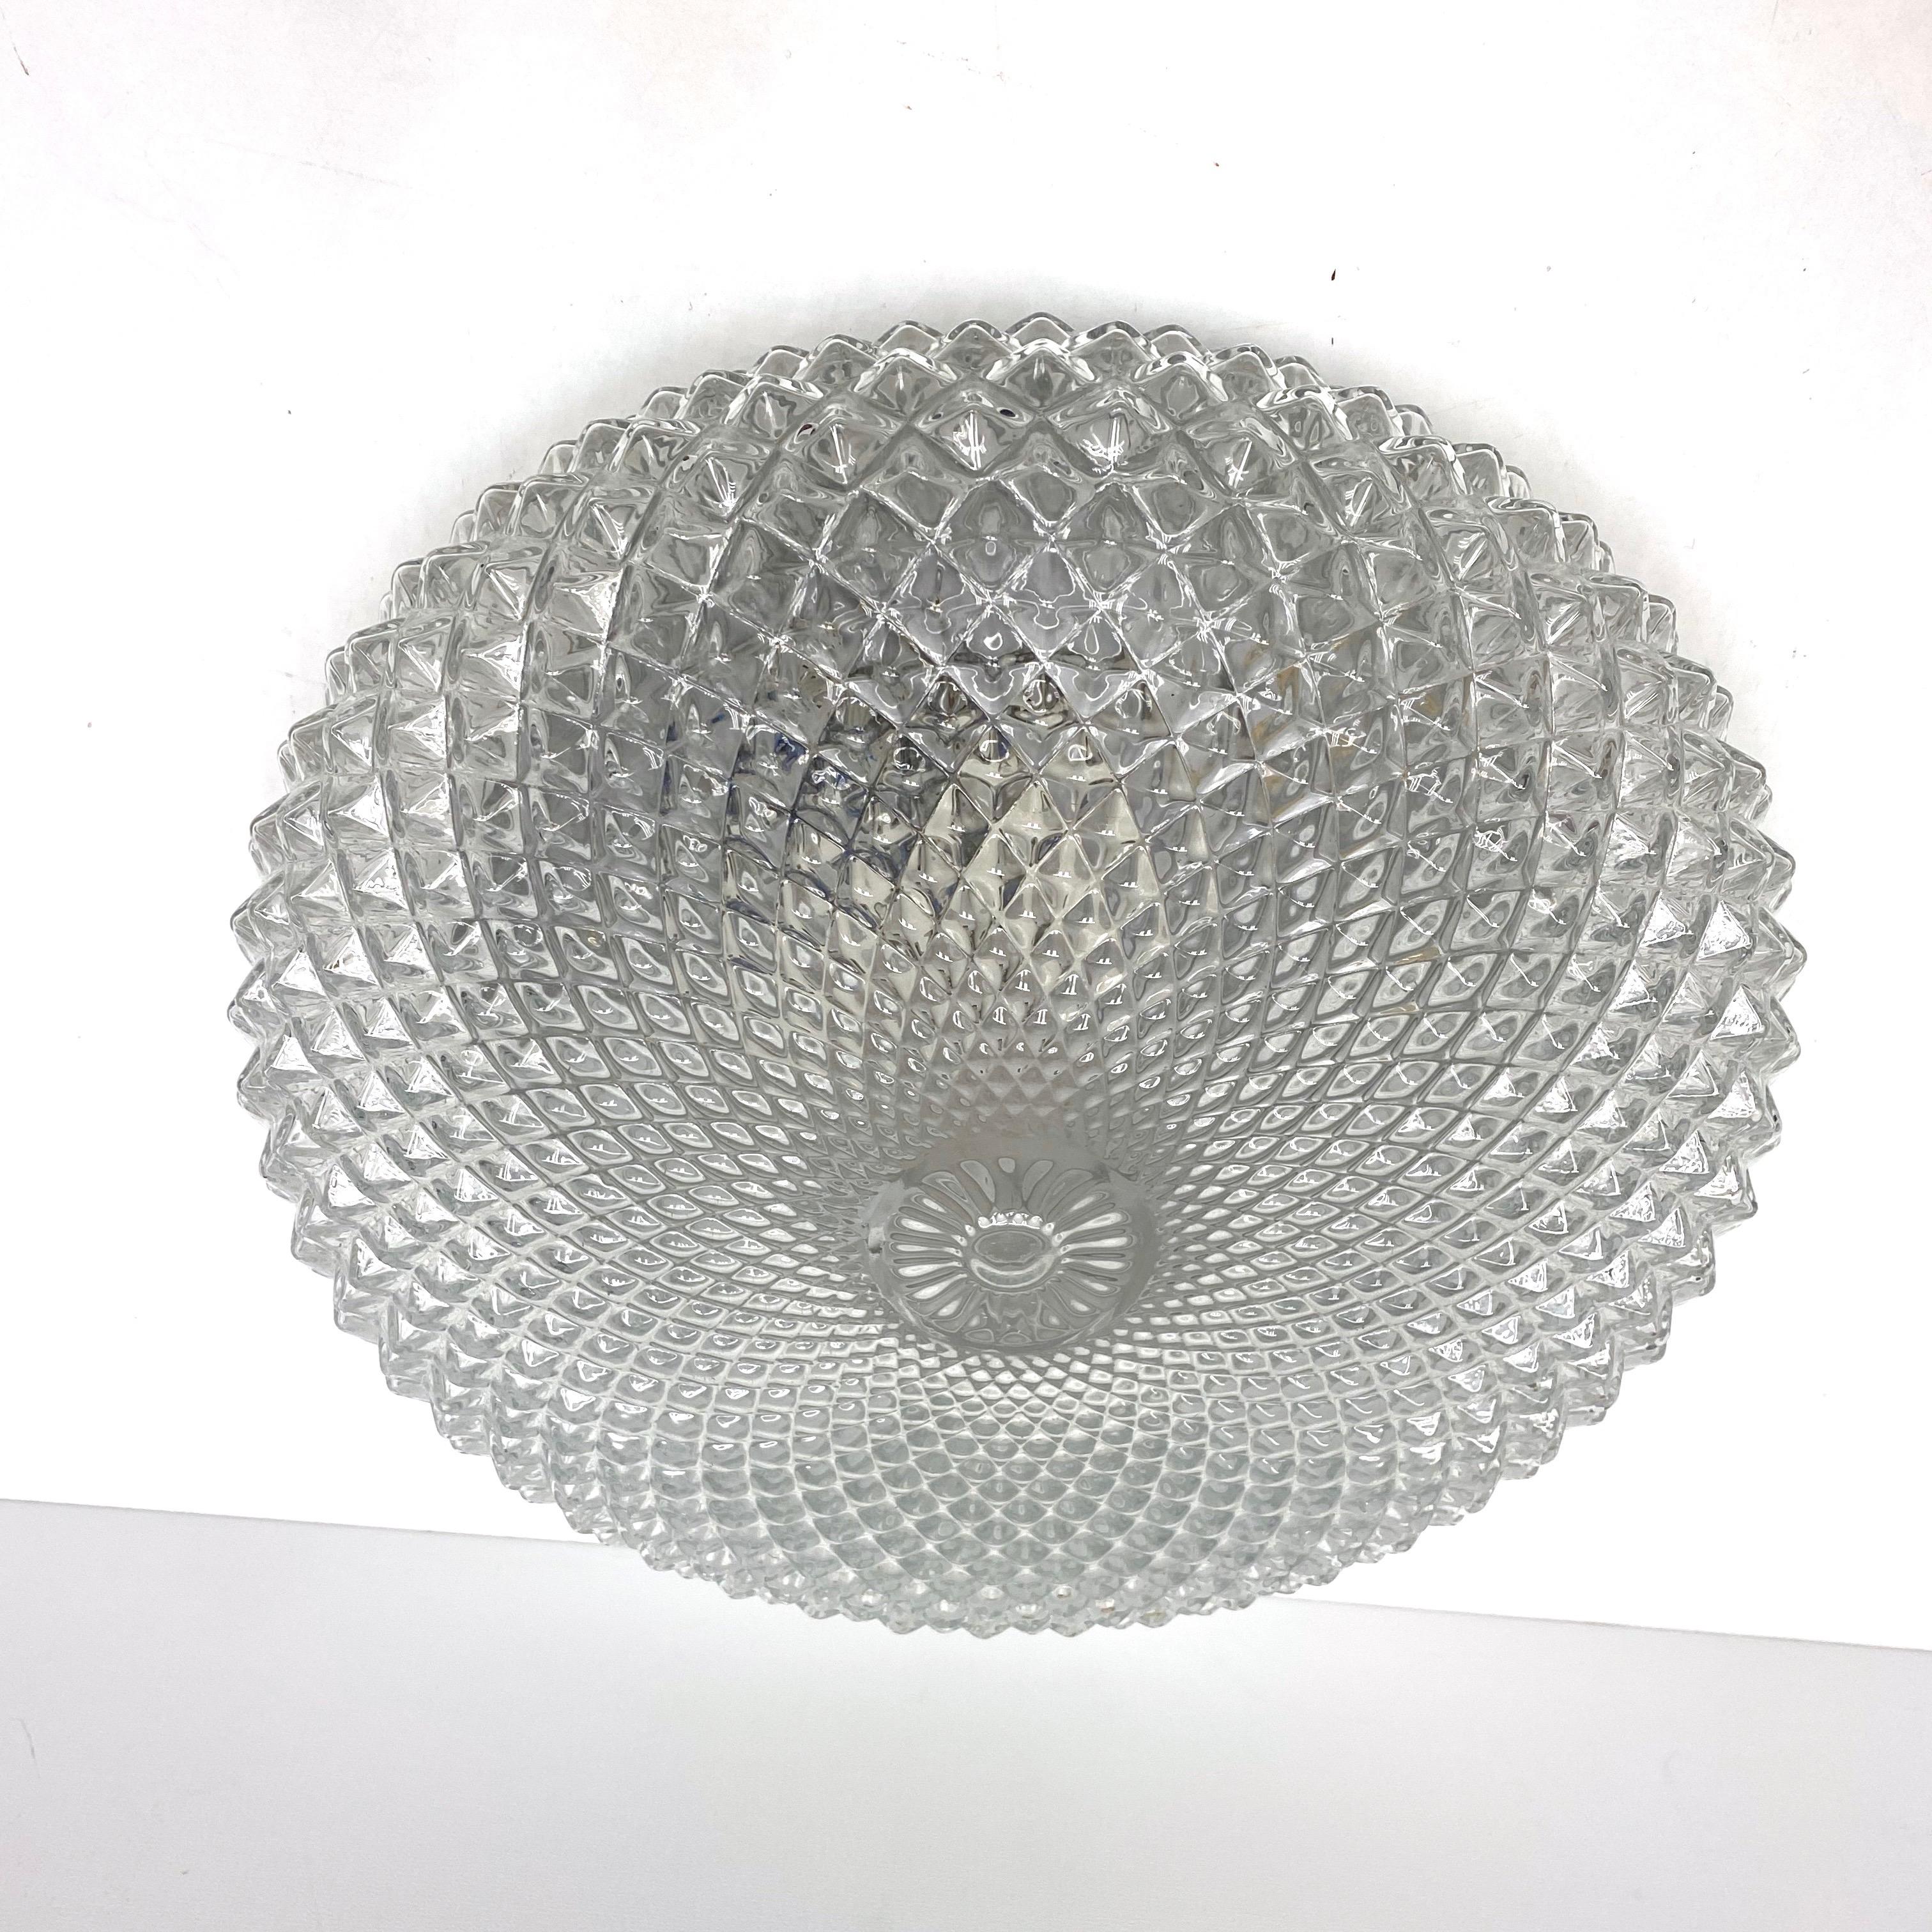 Stunning large crystal pattern clear glass flush mount. Made in Germany by Glashütte Limburg. Gorgeous textured glass flush mount with metal fixture. The fixture requires two European E27 Edison or medium bulb up to 60 watts.